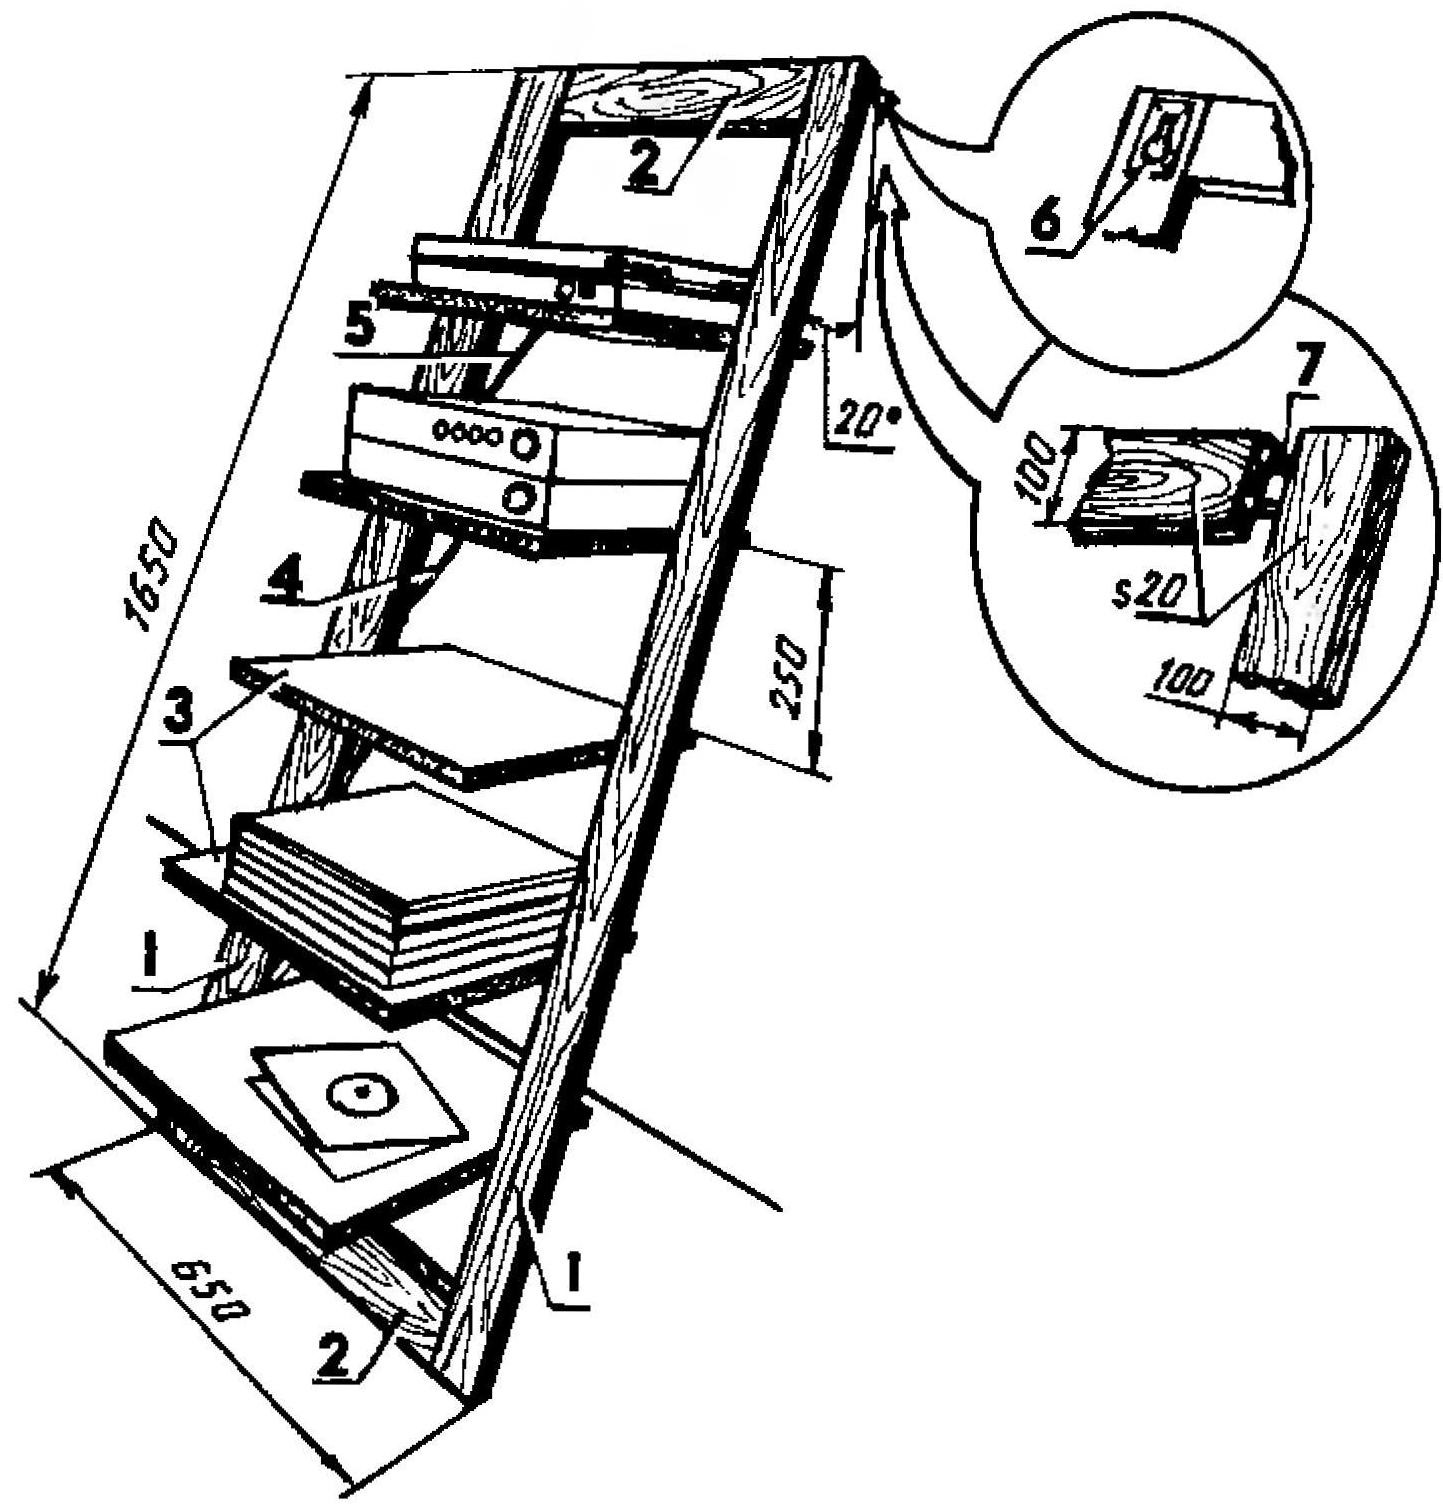 Fig. 1. The variant of wall open Cabinet with shelves